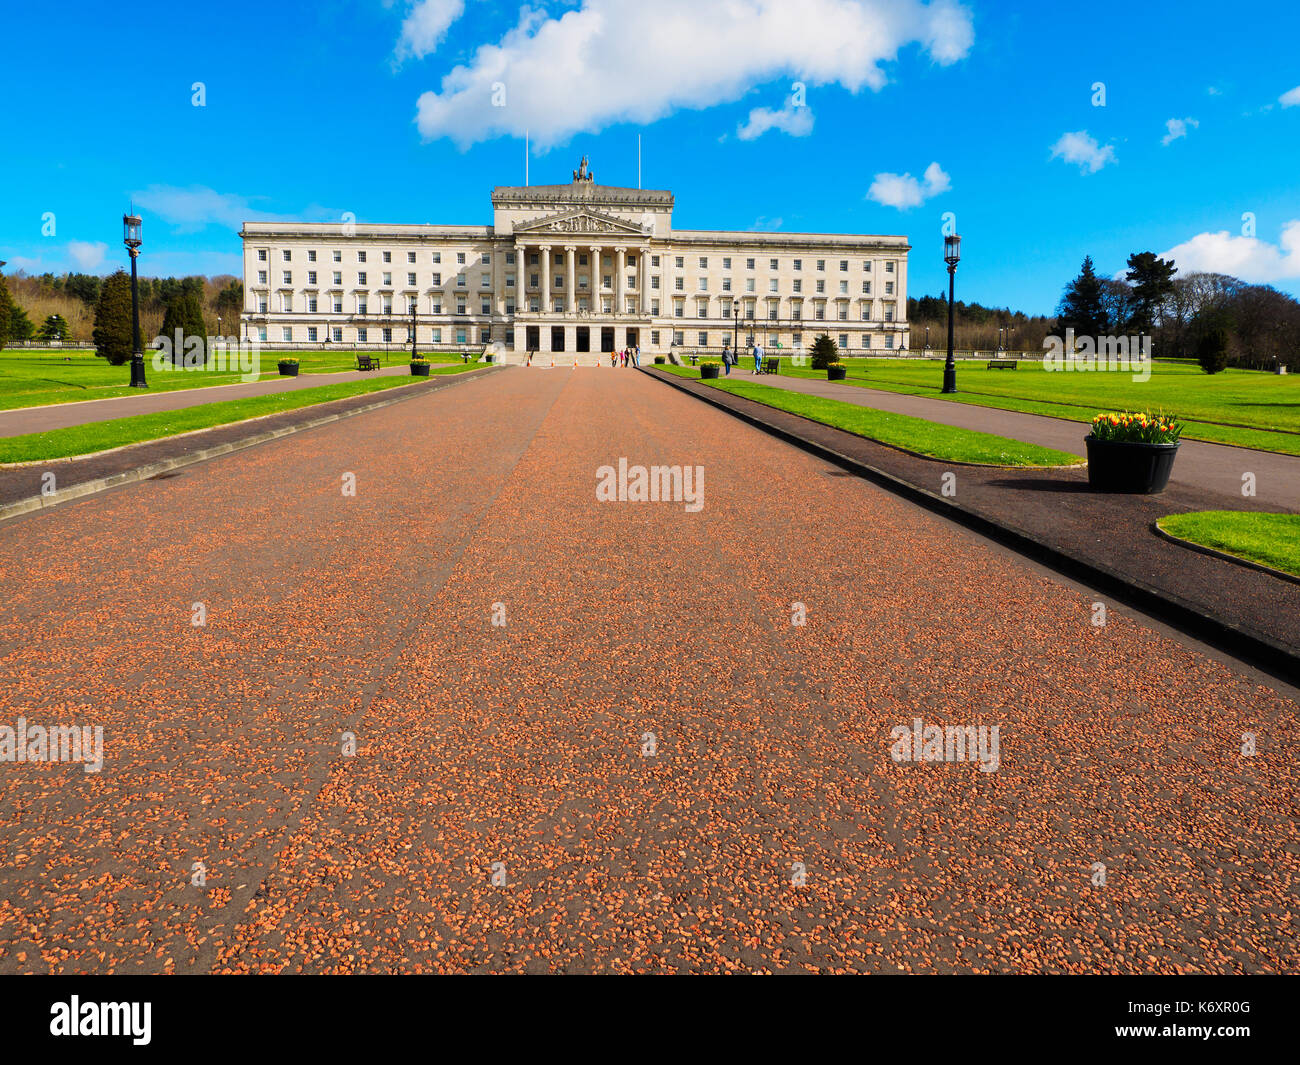 Belfast, County Down, Northern Ireland - Apirl 02, 2017: Stormont Building, Seat of Local Government for Northern Ireland Stock Photo